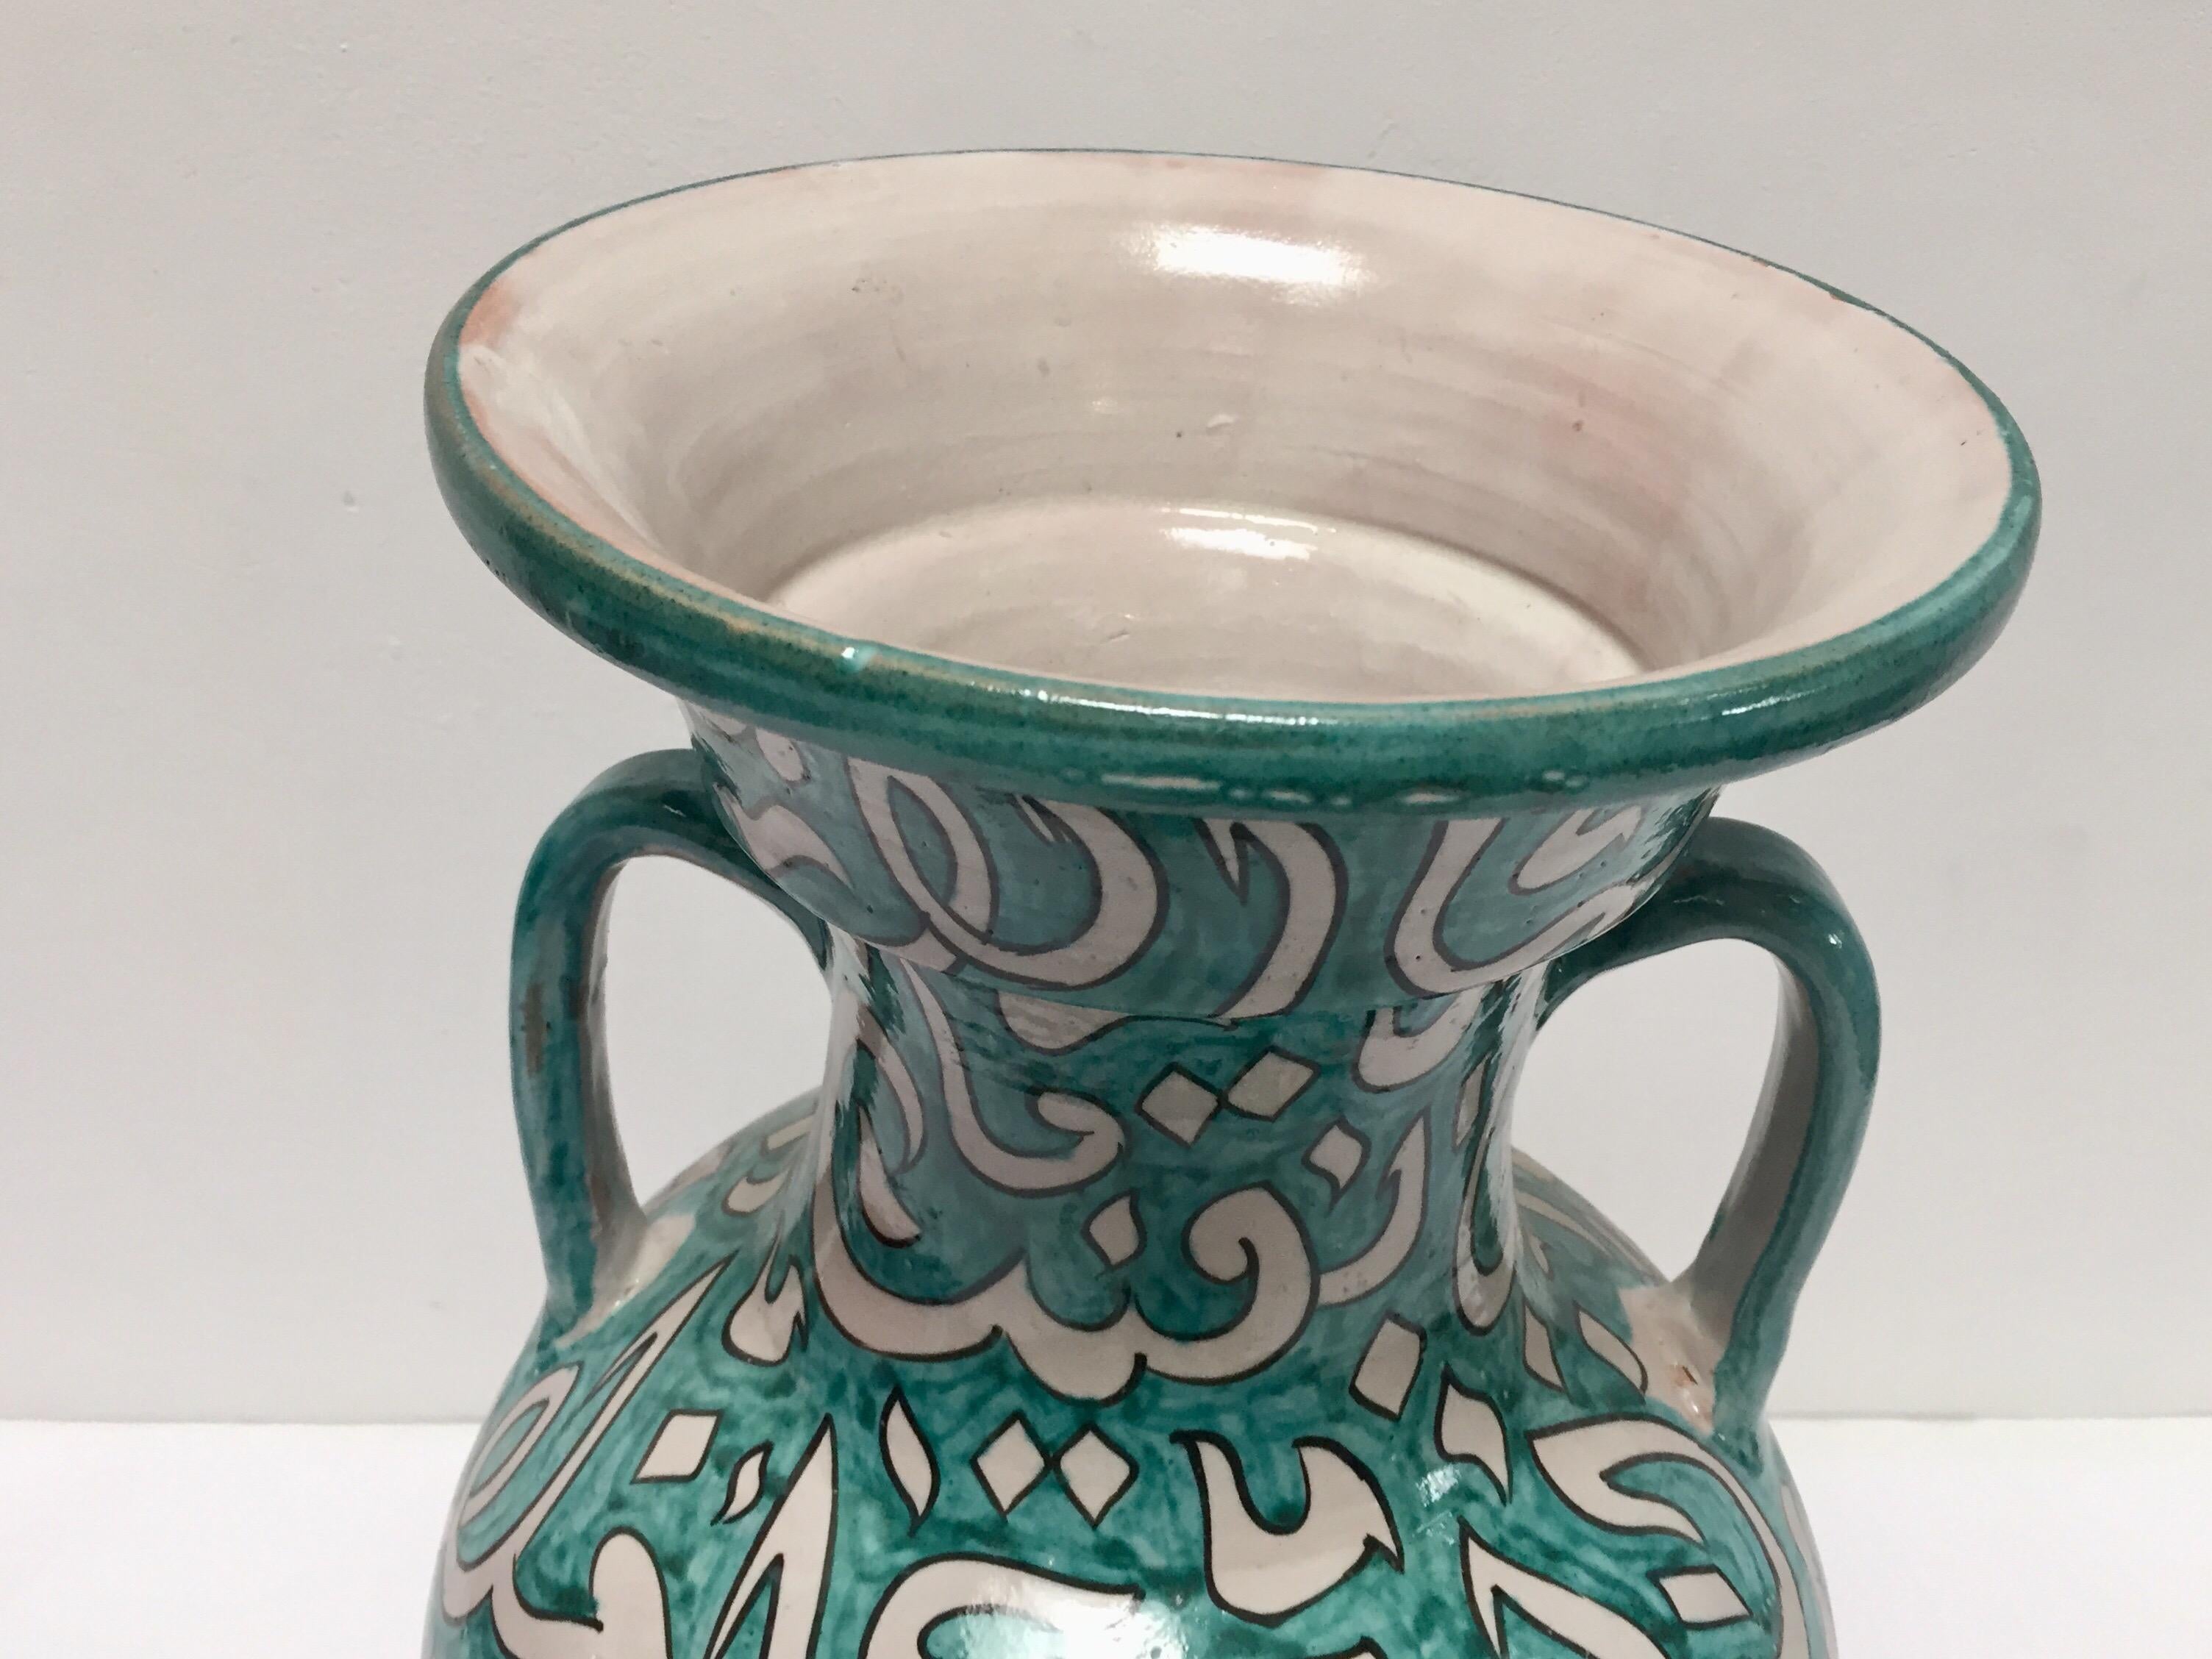 Islamic Large Moroccan Glazed Ceramic Vase with Arabic Calligraphy Turquoise Writing Fez For Sale